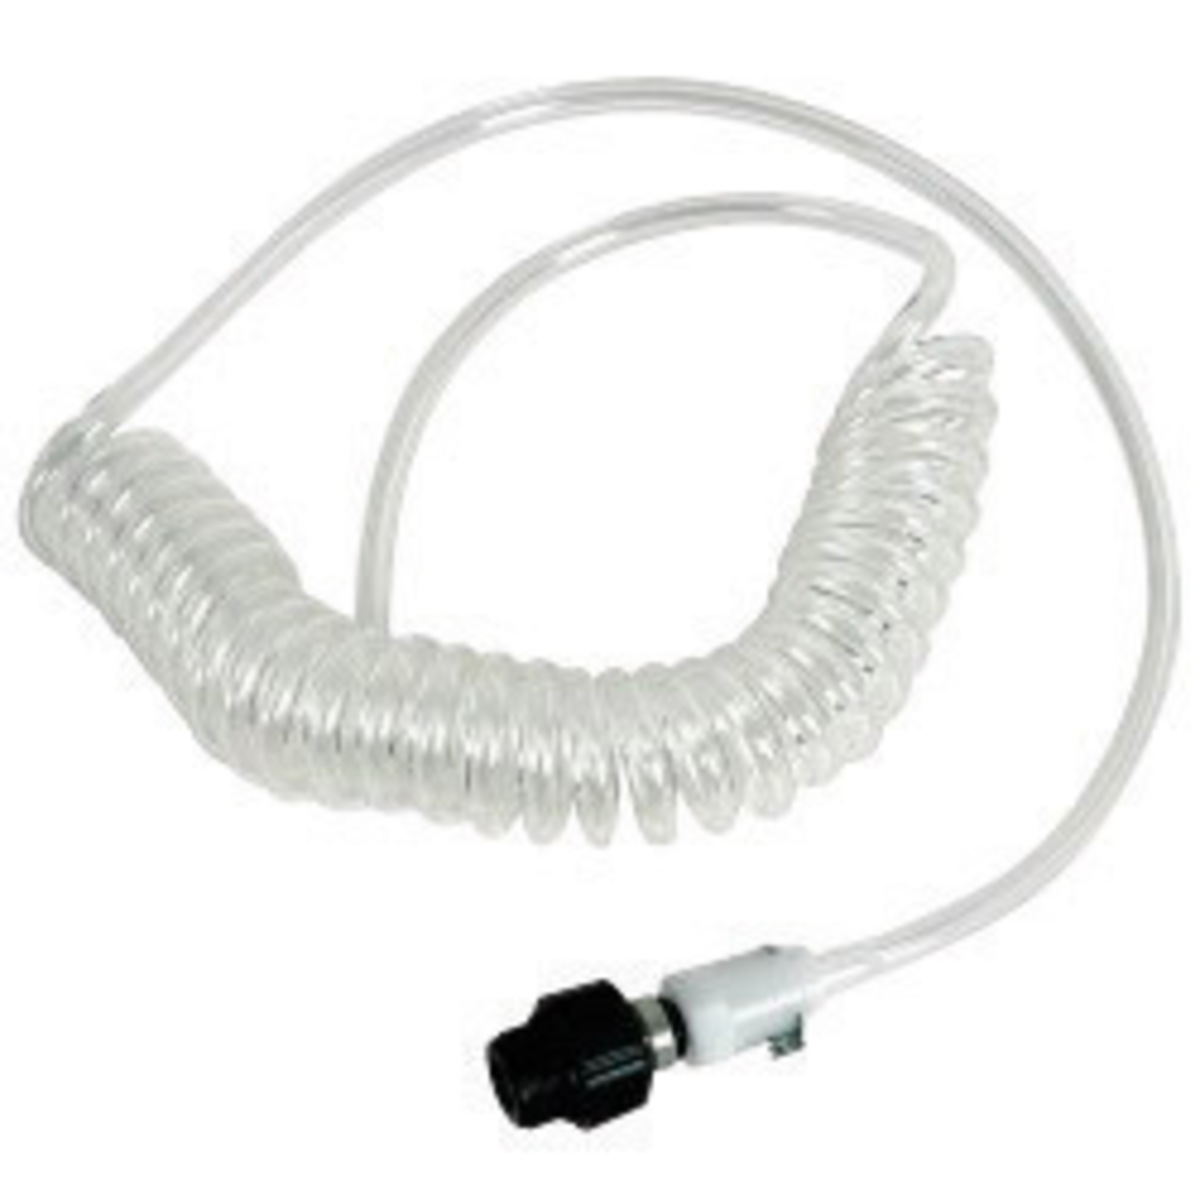 Industrial Scientific Extendible Sampling Tubing/Probe Kit For Use With MX6 Multi-Gas Detector